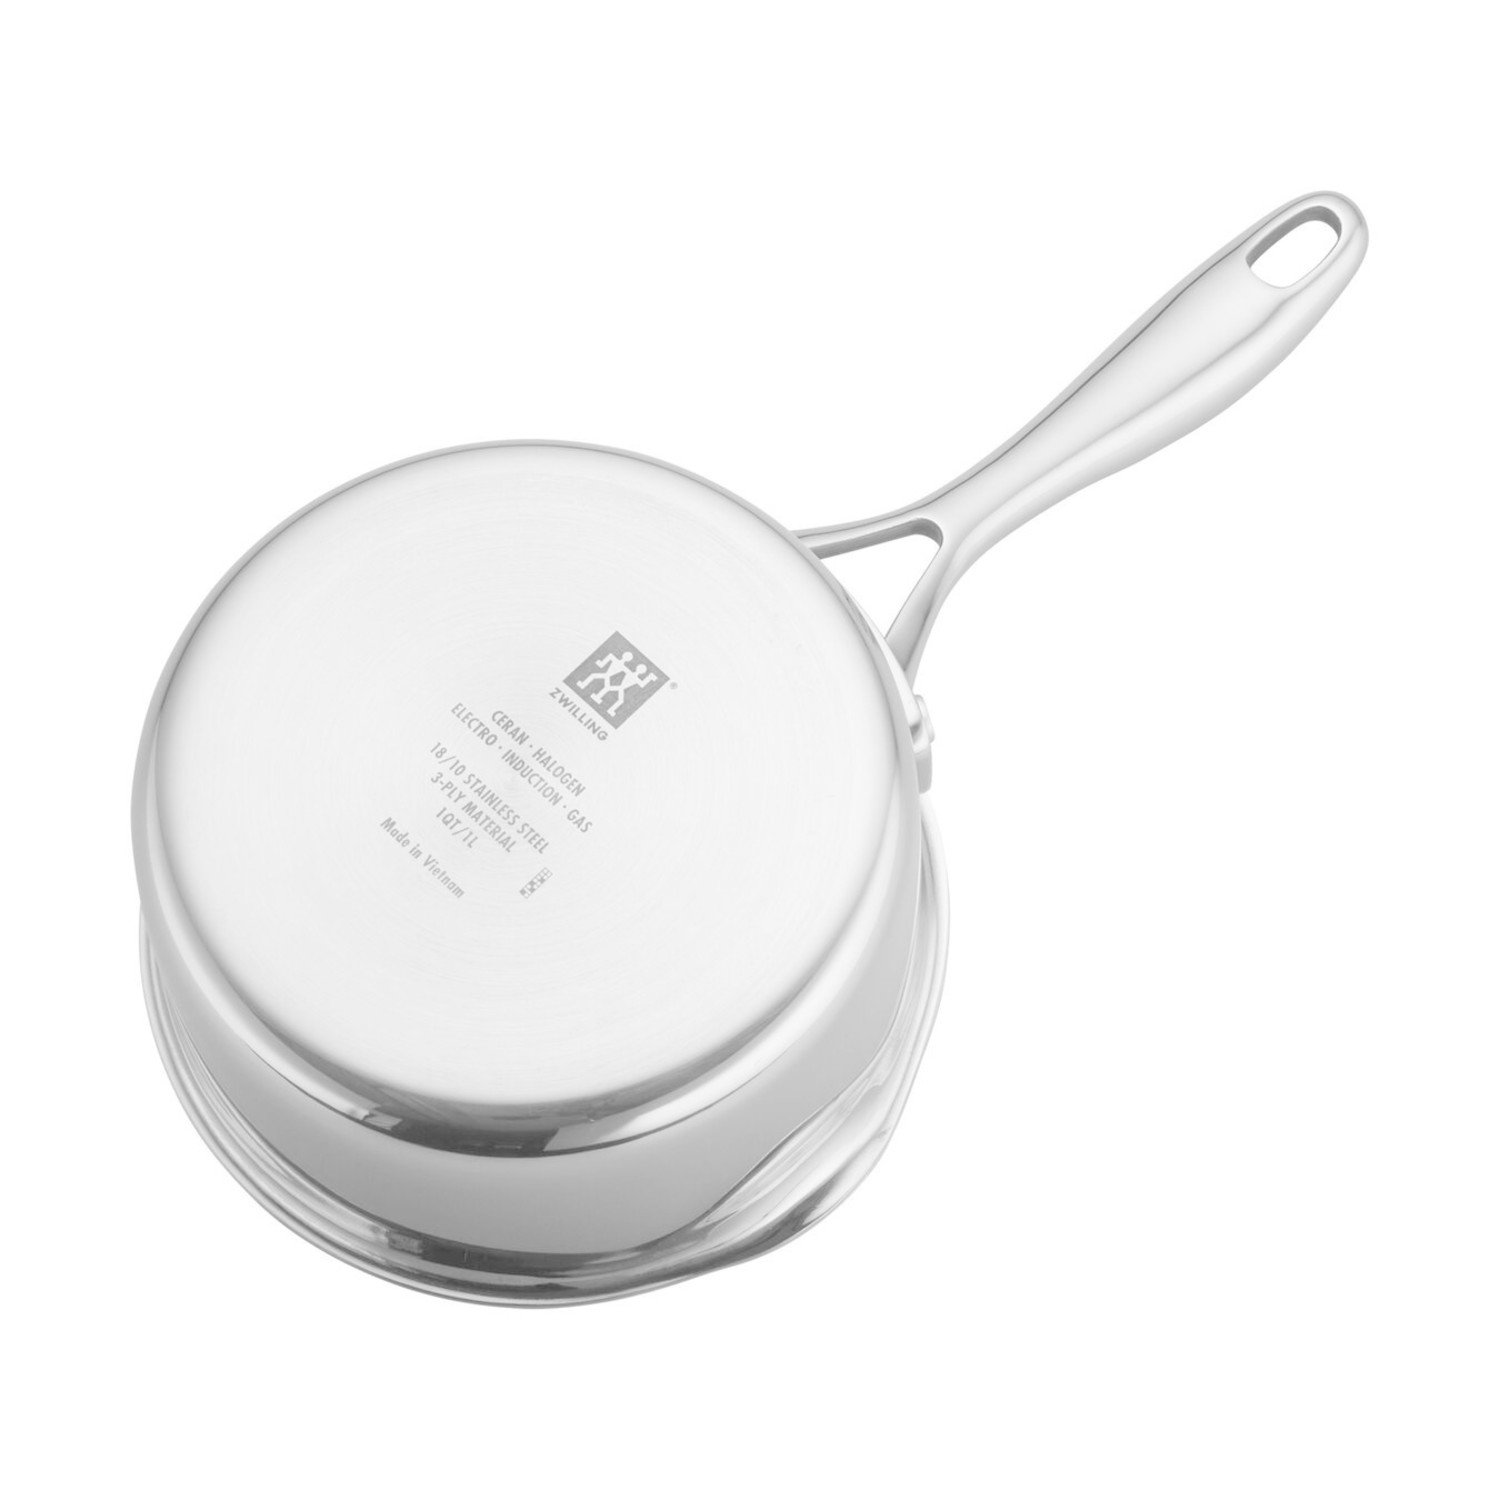 Buy ZWILLING Clad CFX Sauce pan with lid